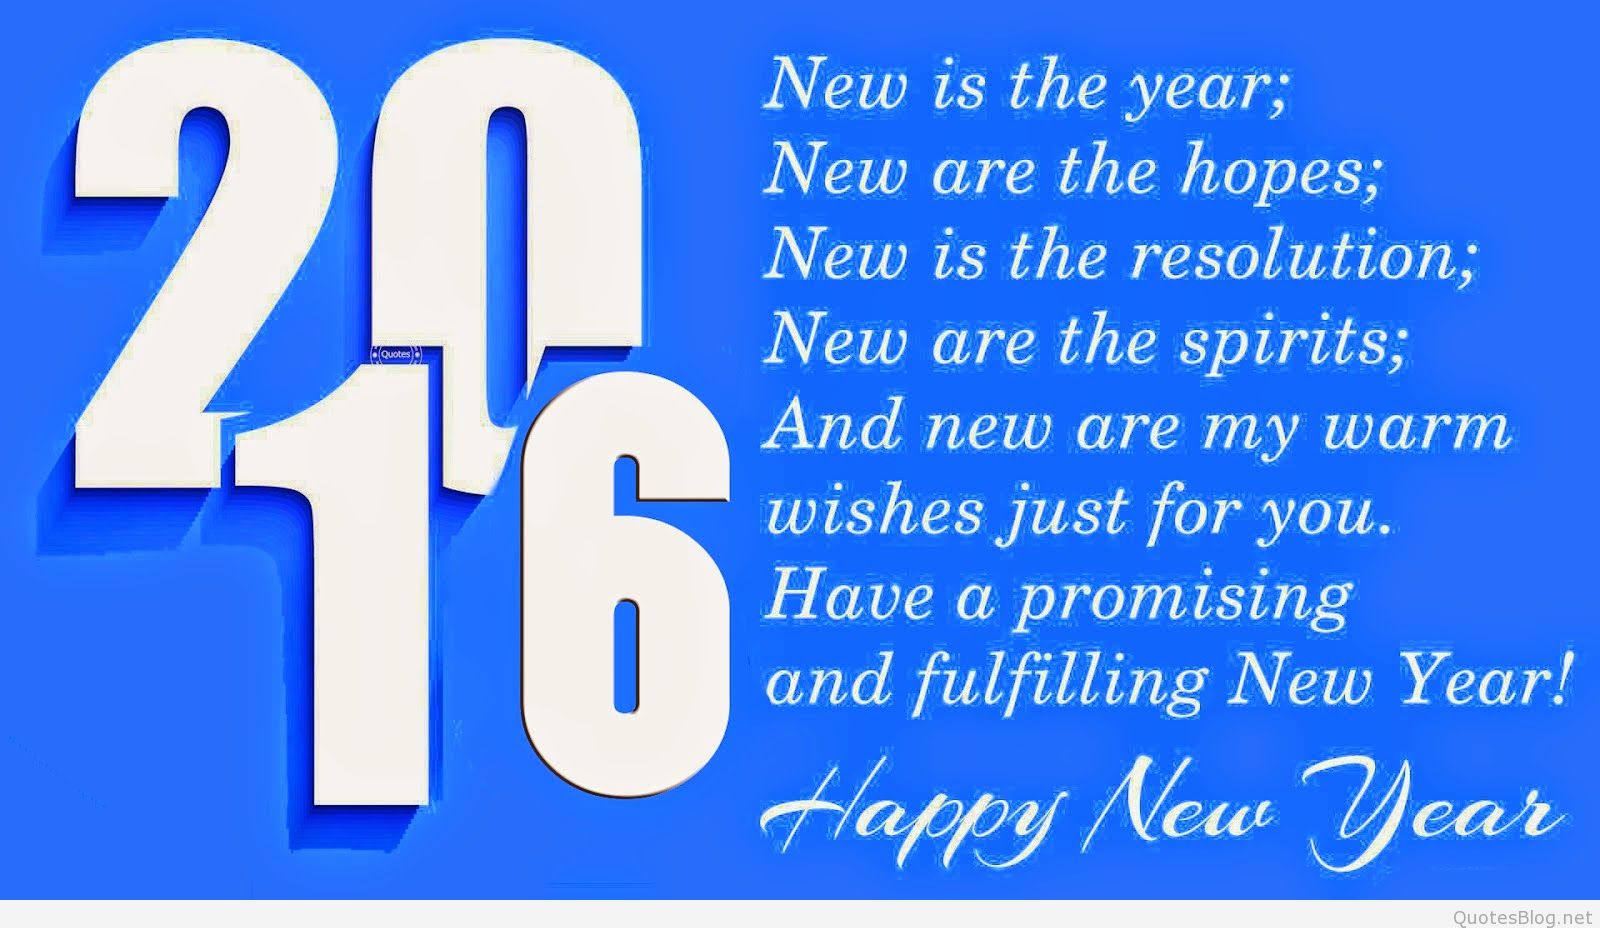 Happy New Year 2016 Quotes Hd Wallpapers1 - Nice Quotes On New Year - HD Wallpaper 